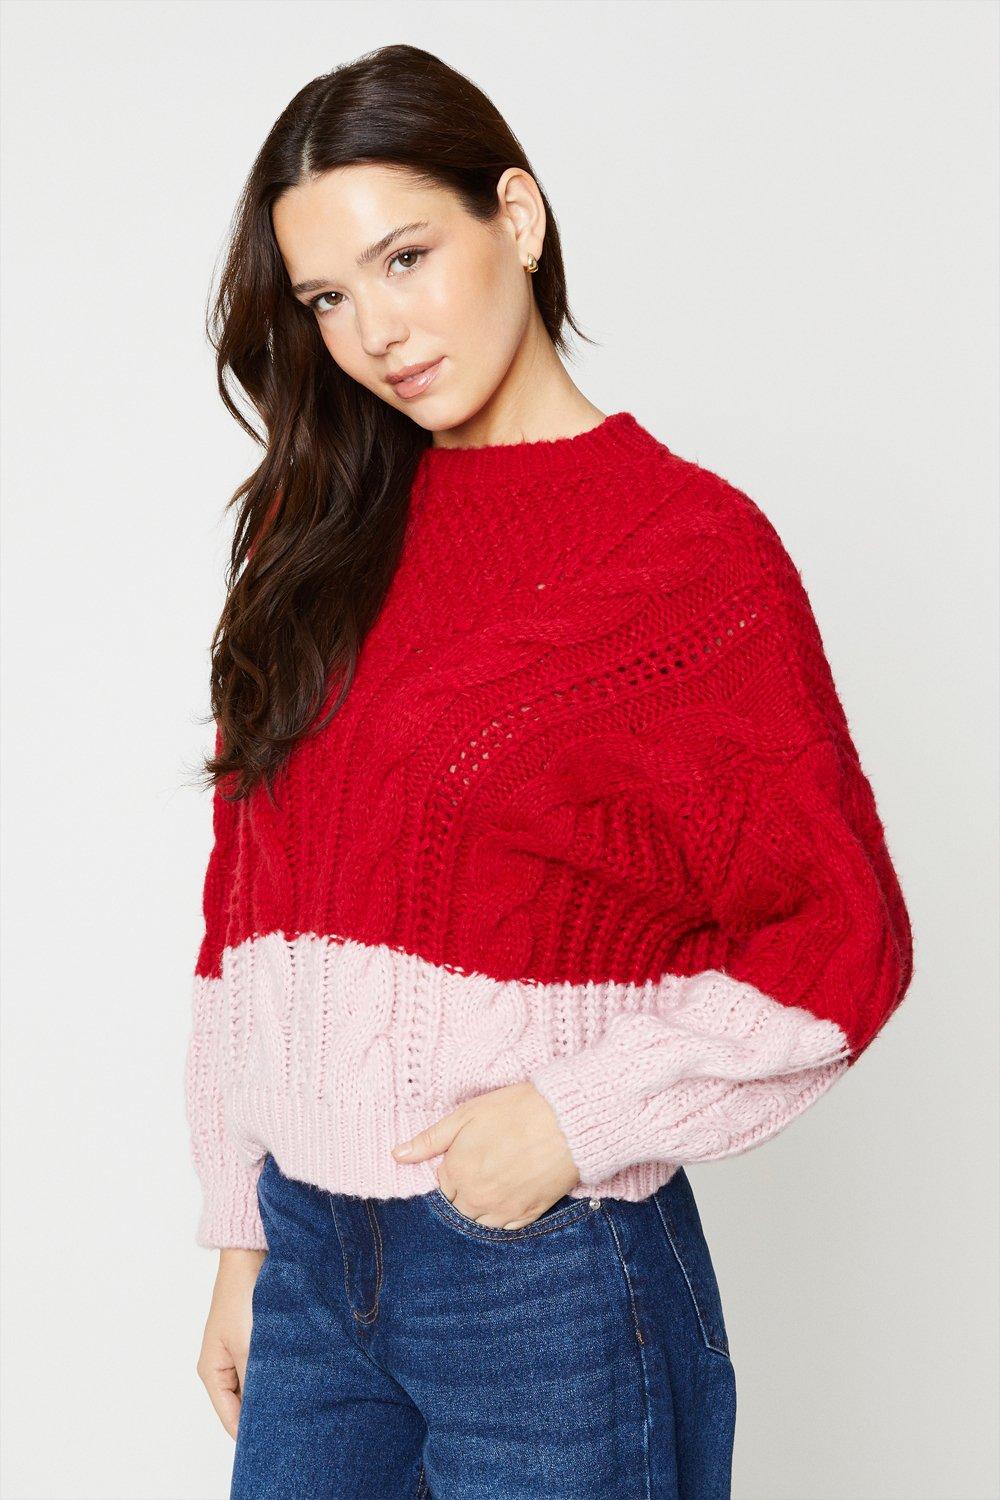 Women’s Long Sleeve Colour Block Cable Knitted Jumper - red - L